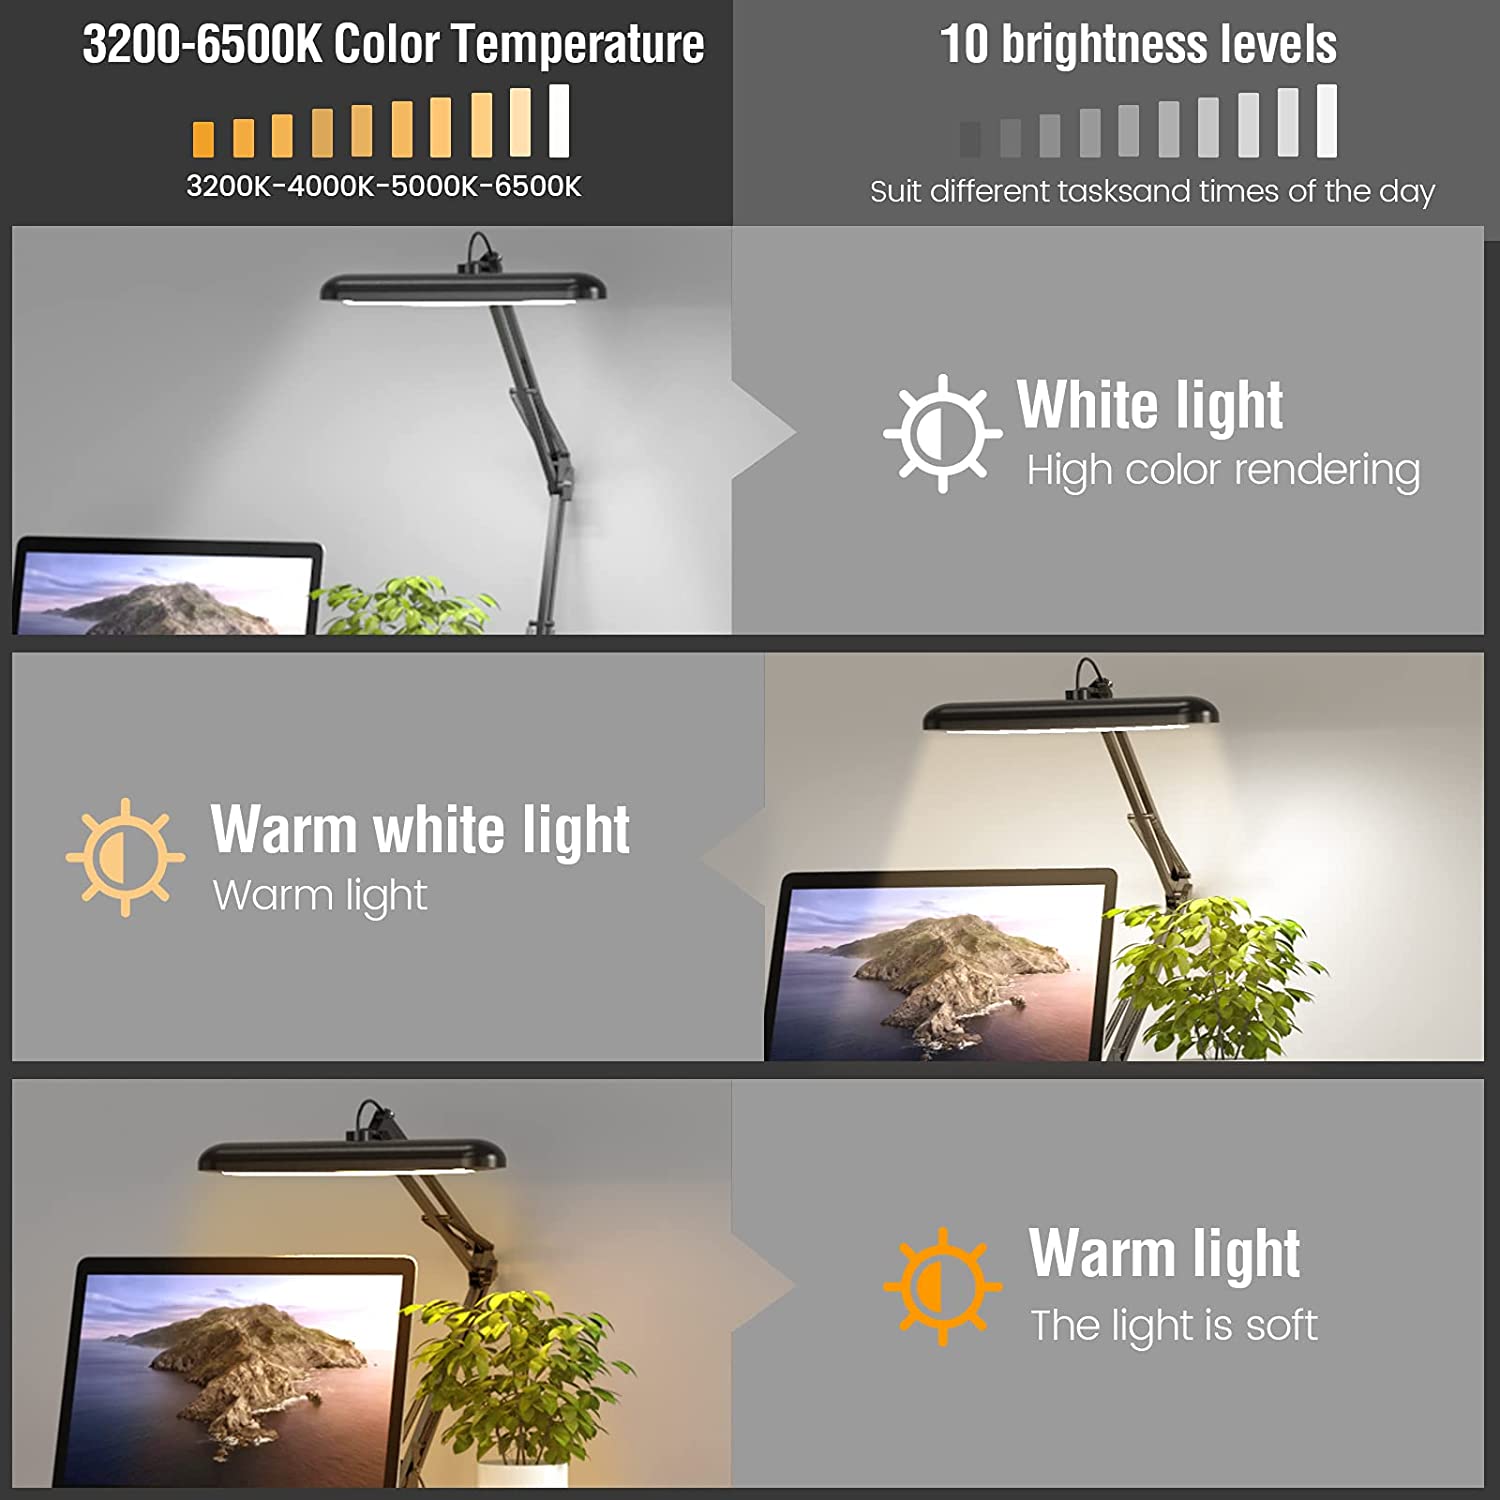 Led Desk Lamp Usb Foldable Clip Read Lamp Metal Stand Long Arm Swing Transversal Screen Eye Protection Light Flexible Classical Table Lamps Indoor Lighting Reading Room Study Book Lampe Work Office